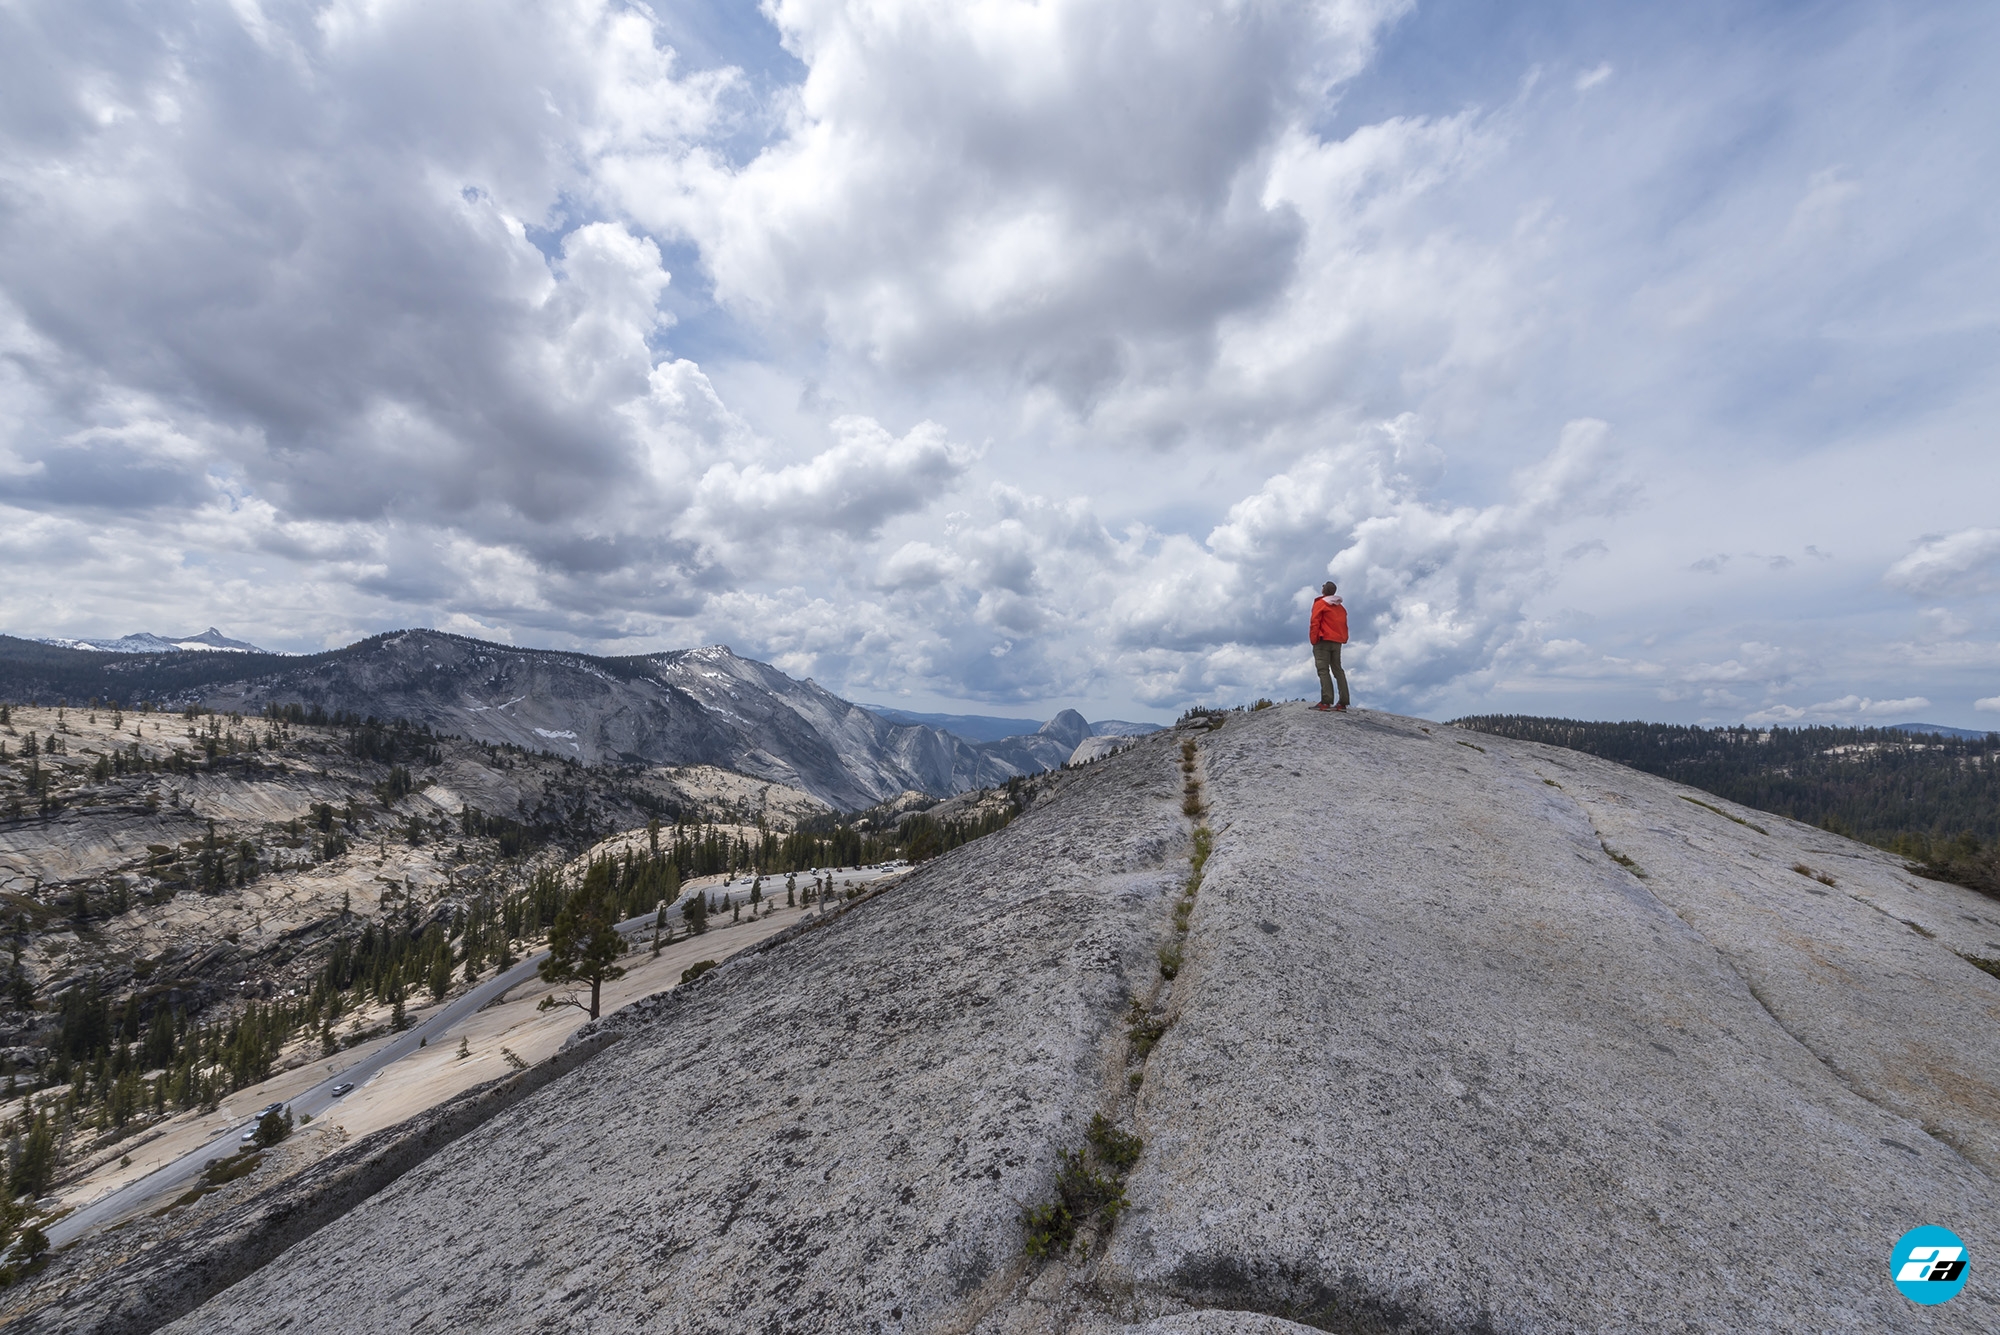 Yosemite National Park, California, USA. Landscape. Explorer. Solitude. Mountain View. Glacier Point. Olmsted Point